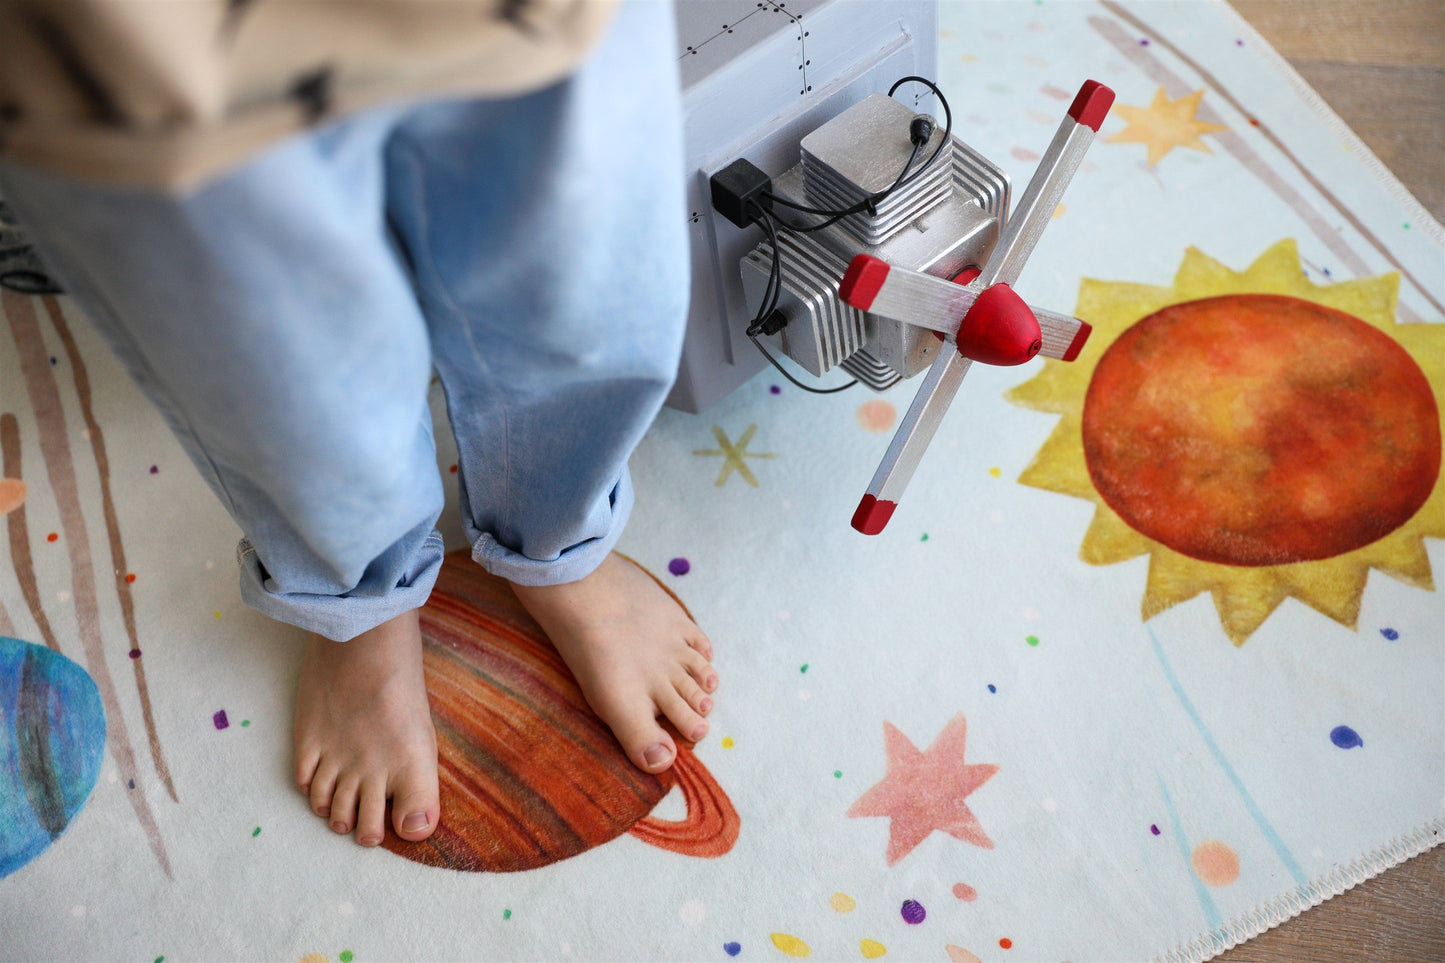 space planet solar system carpet for kids. space planet solar system rug for kids room. Machine washable and nontoxic rug